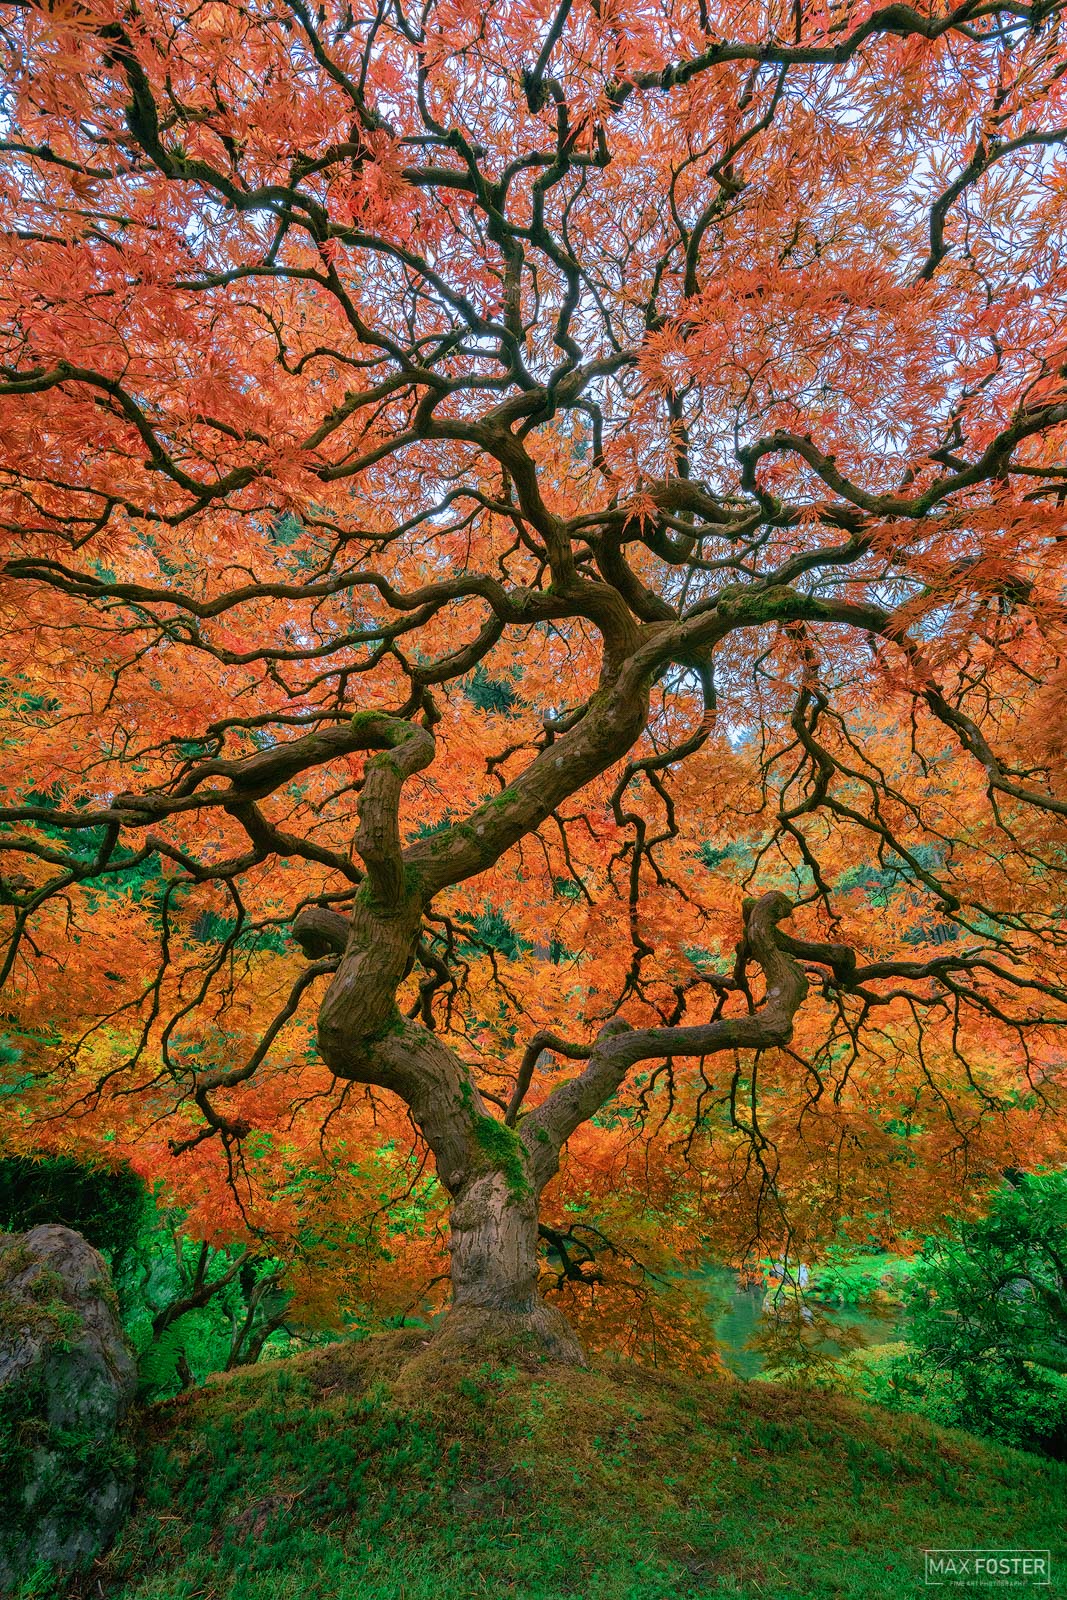 Living Legend, Japanese Maple, Oregon. Photo © copyright by Max Foster